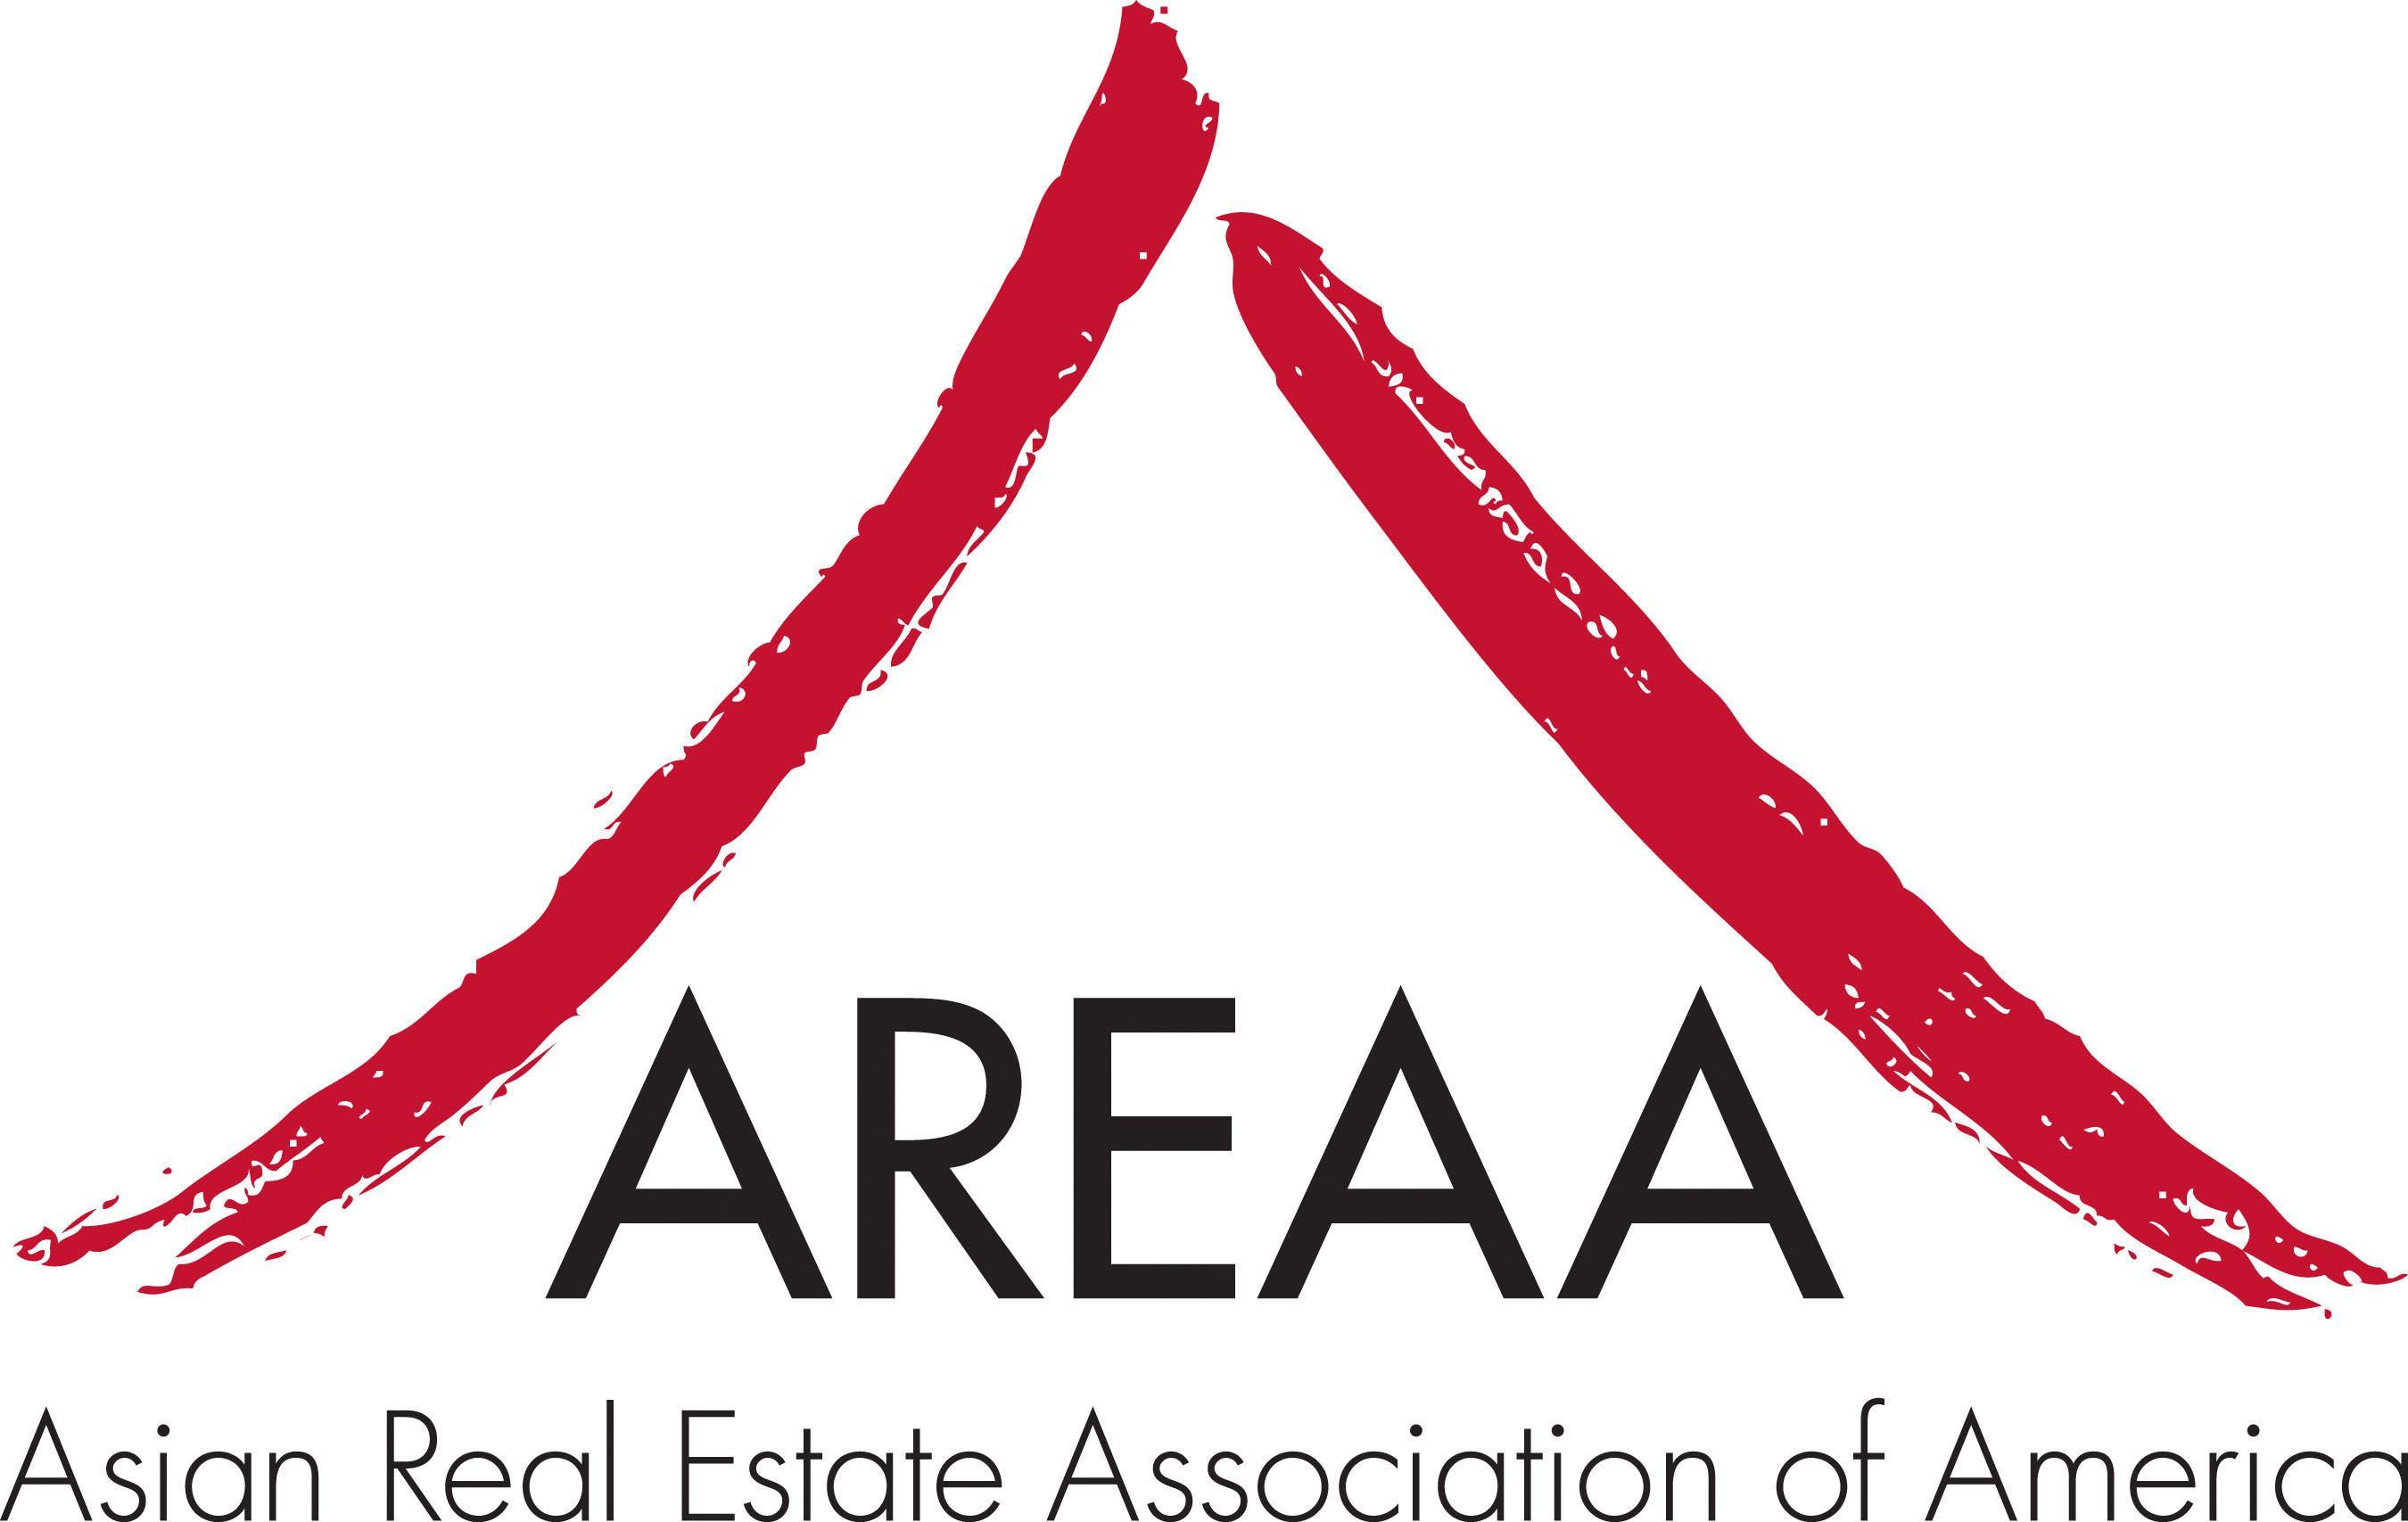 Areaa Logo - For Asian Real Estate Association of America (AREAA), Asian American ...